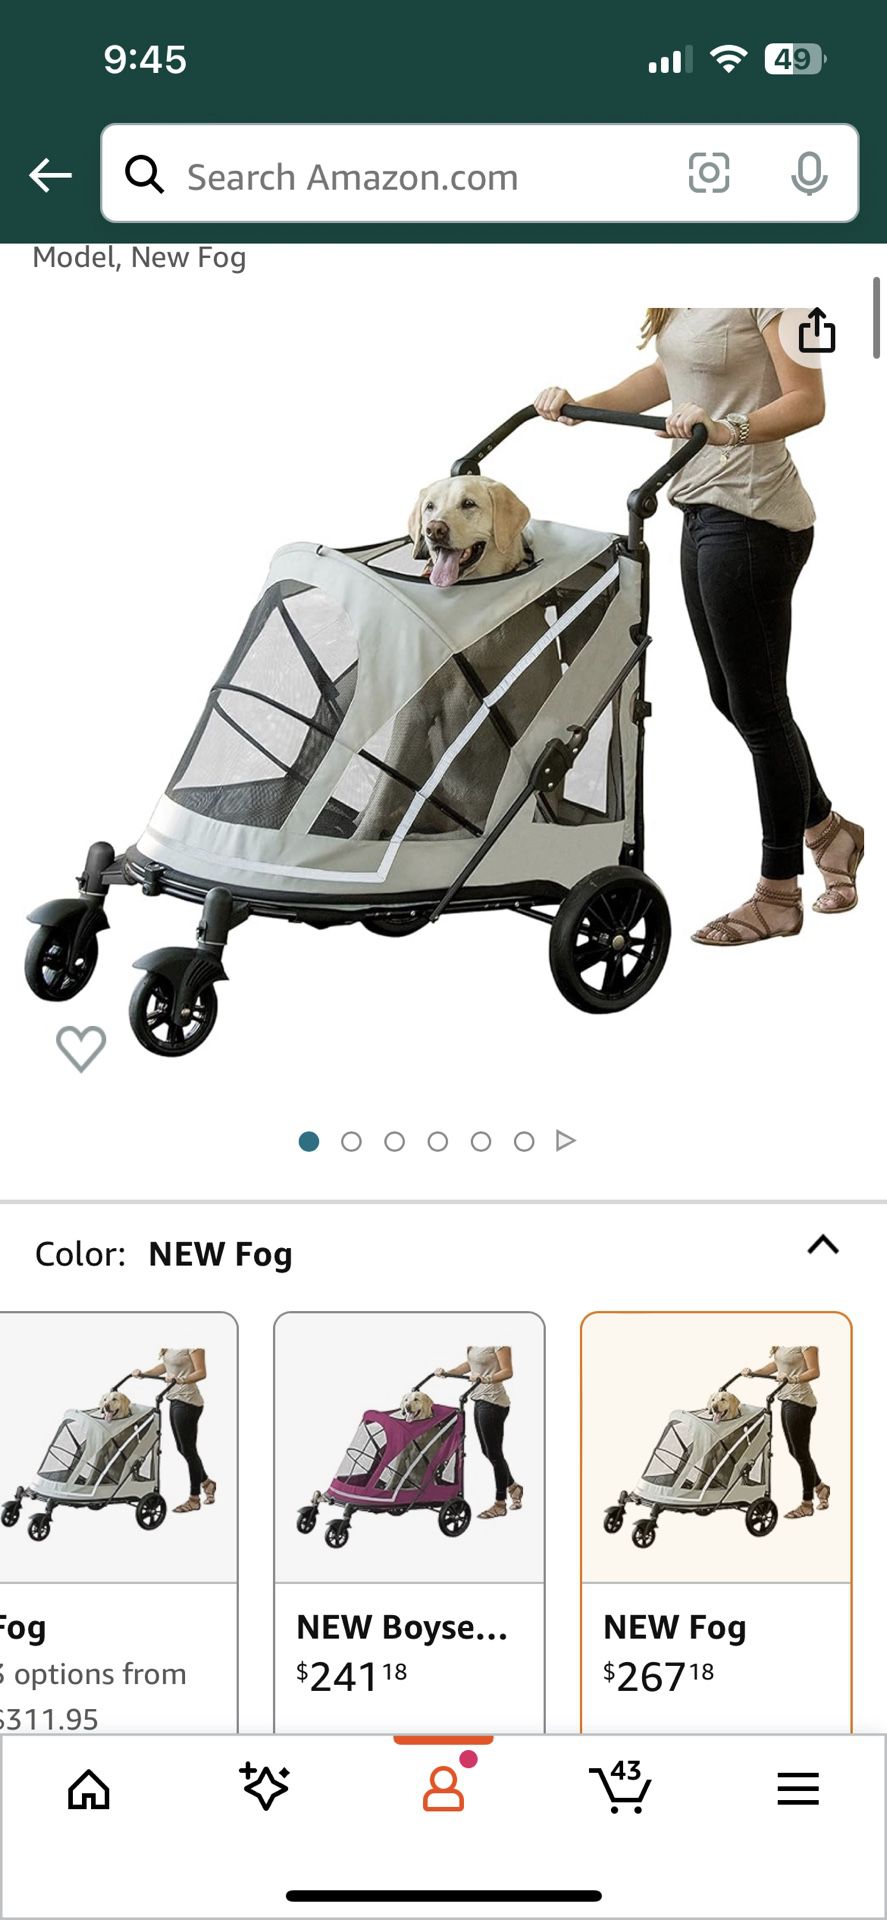 XL dog Stroller - Up To 150 Lbs